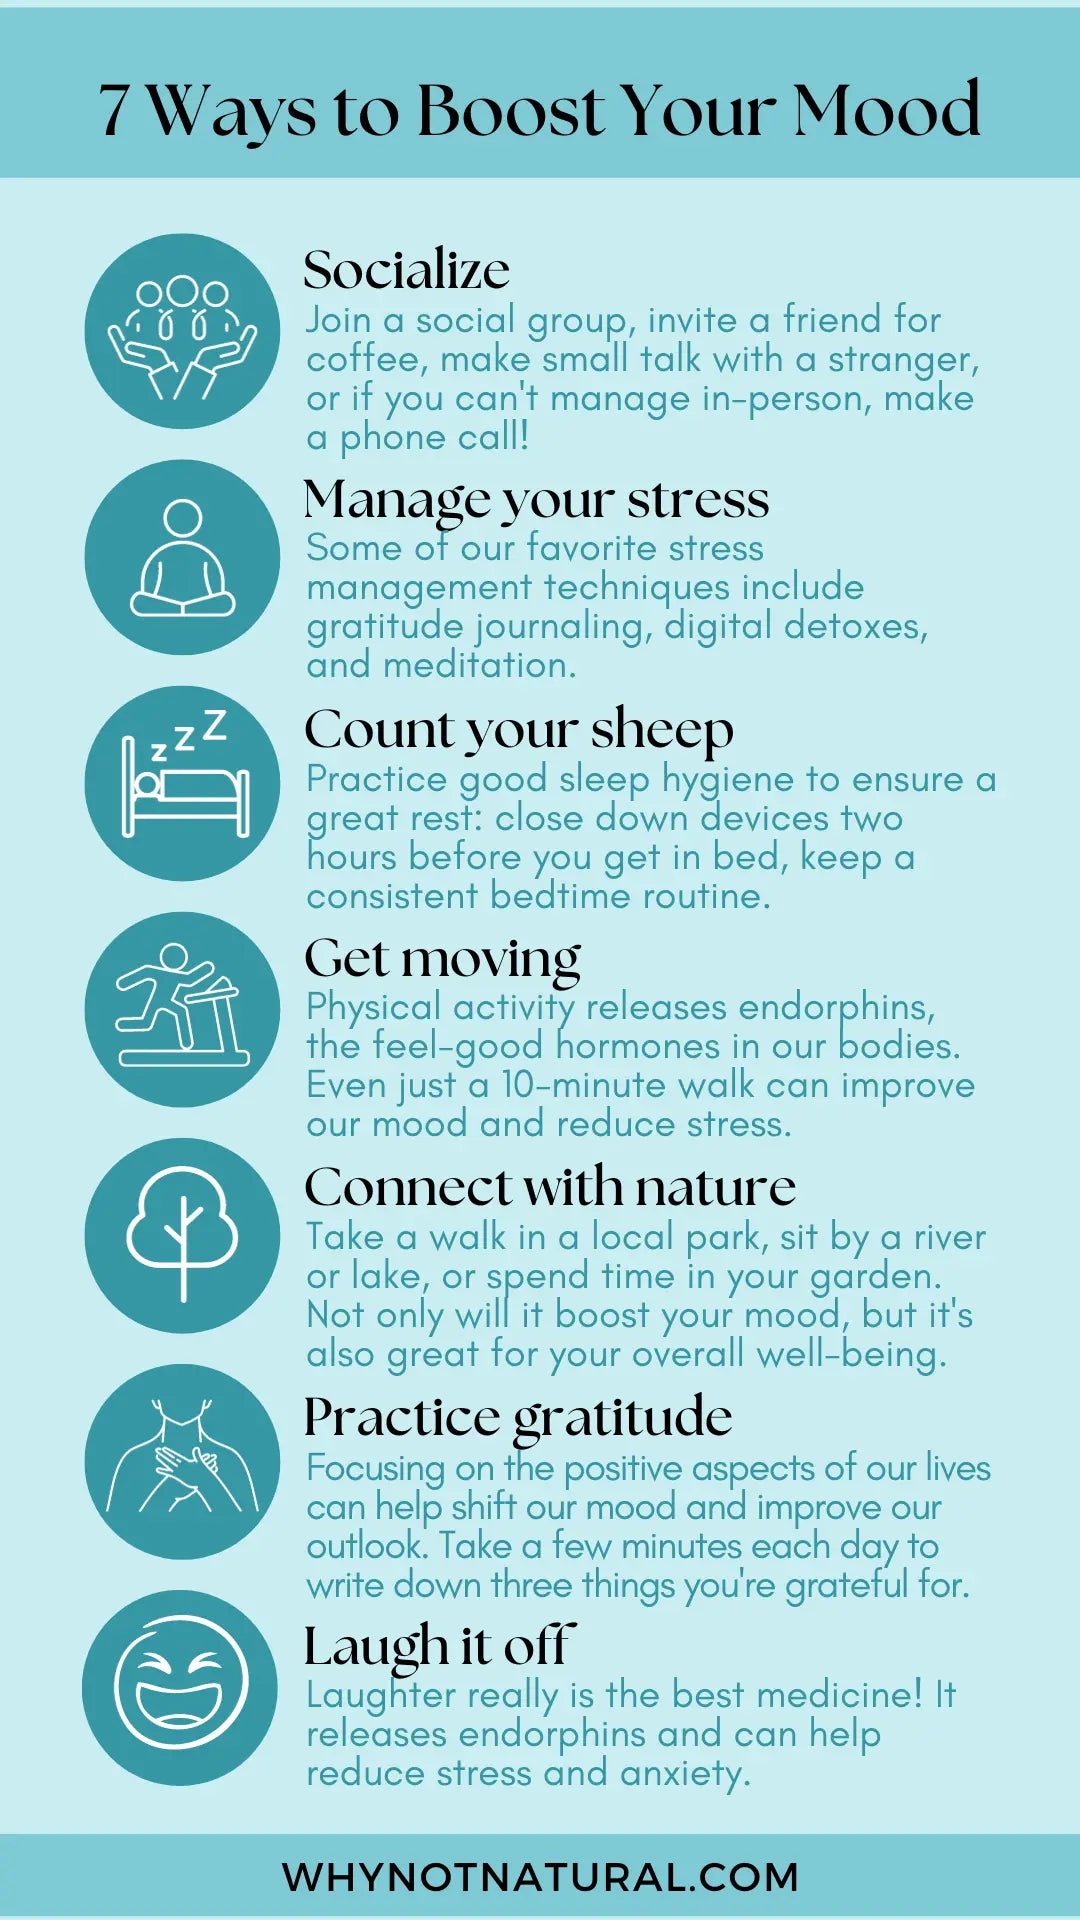 7 Ways to Boost Your Mood